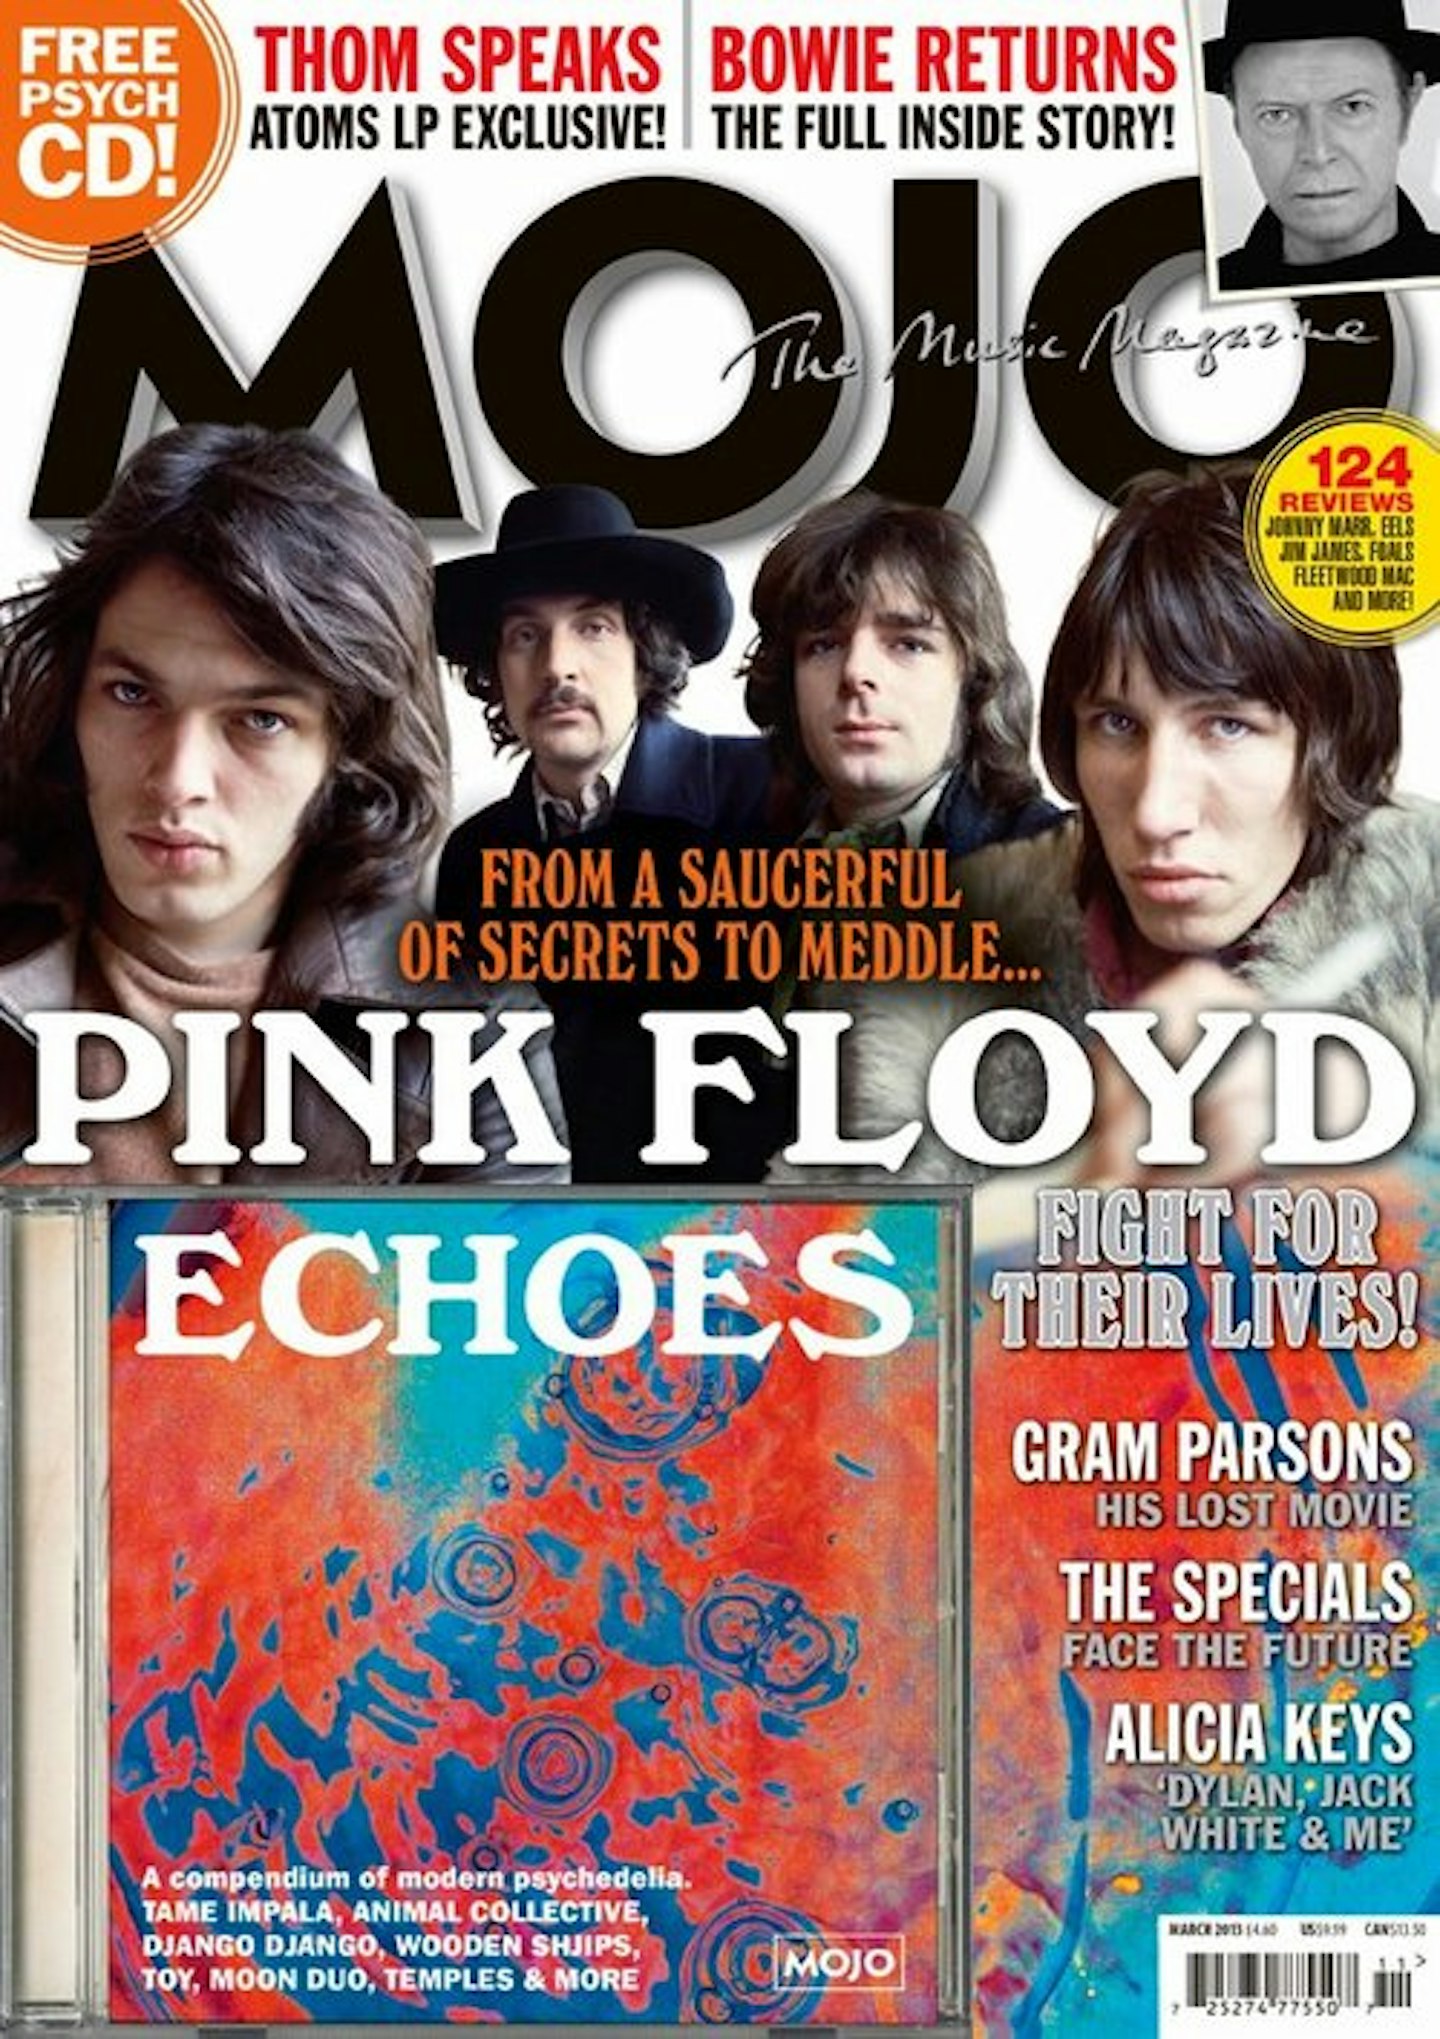 MOJO Issue 232 / March 2013